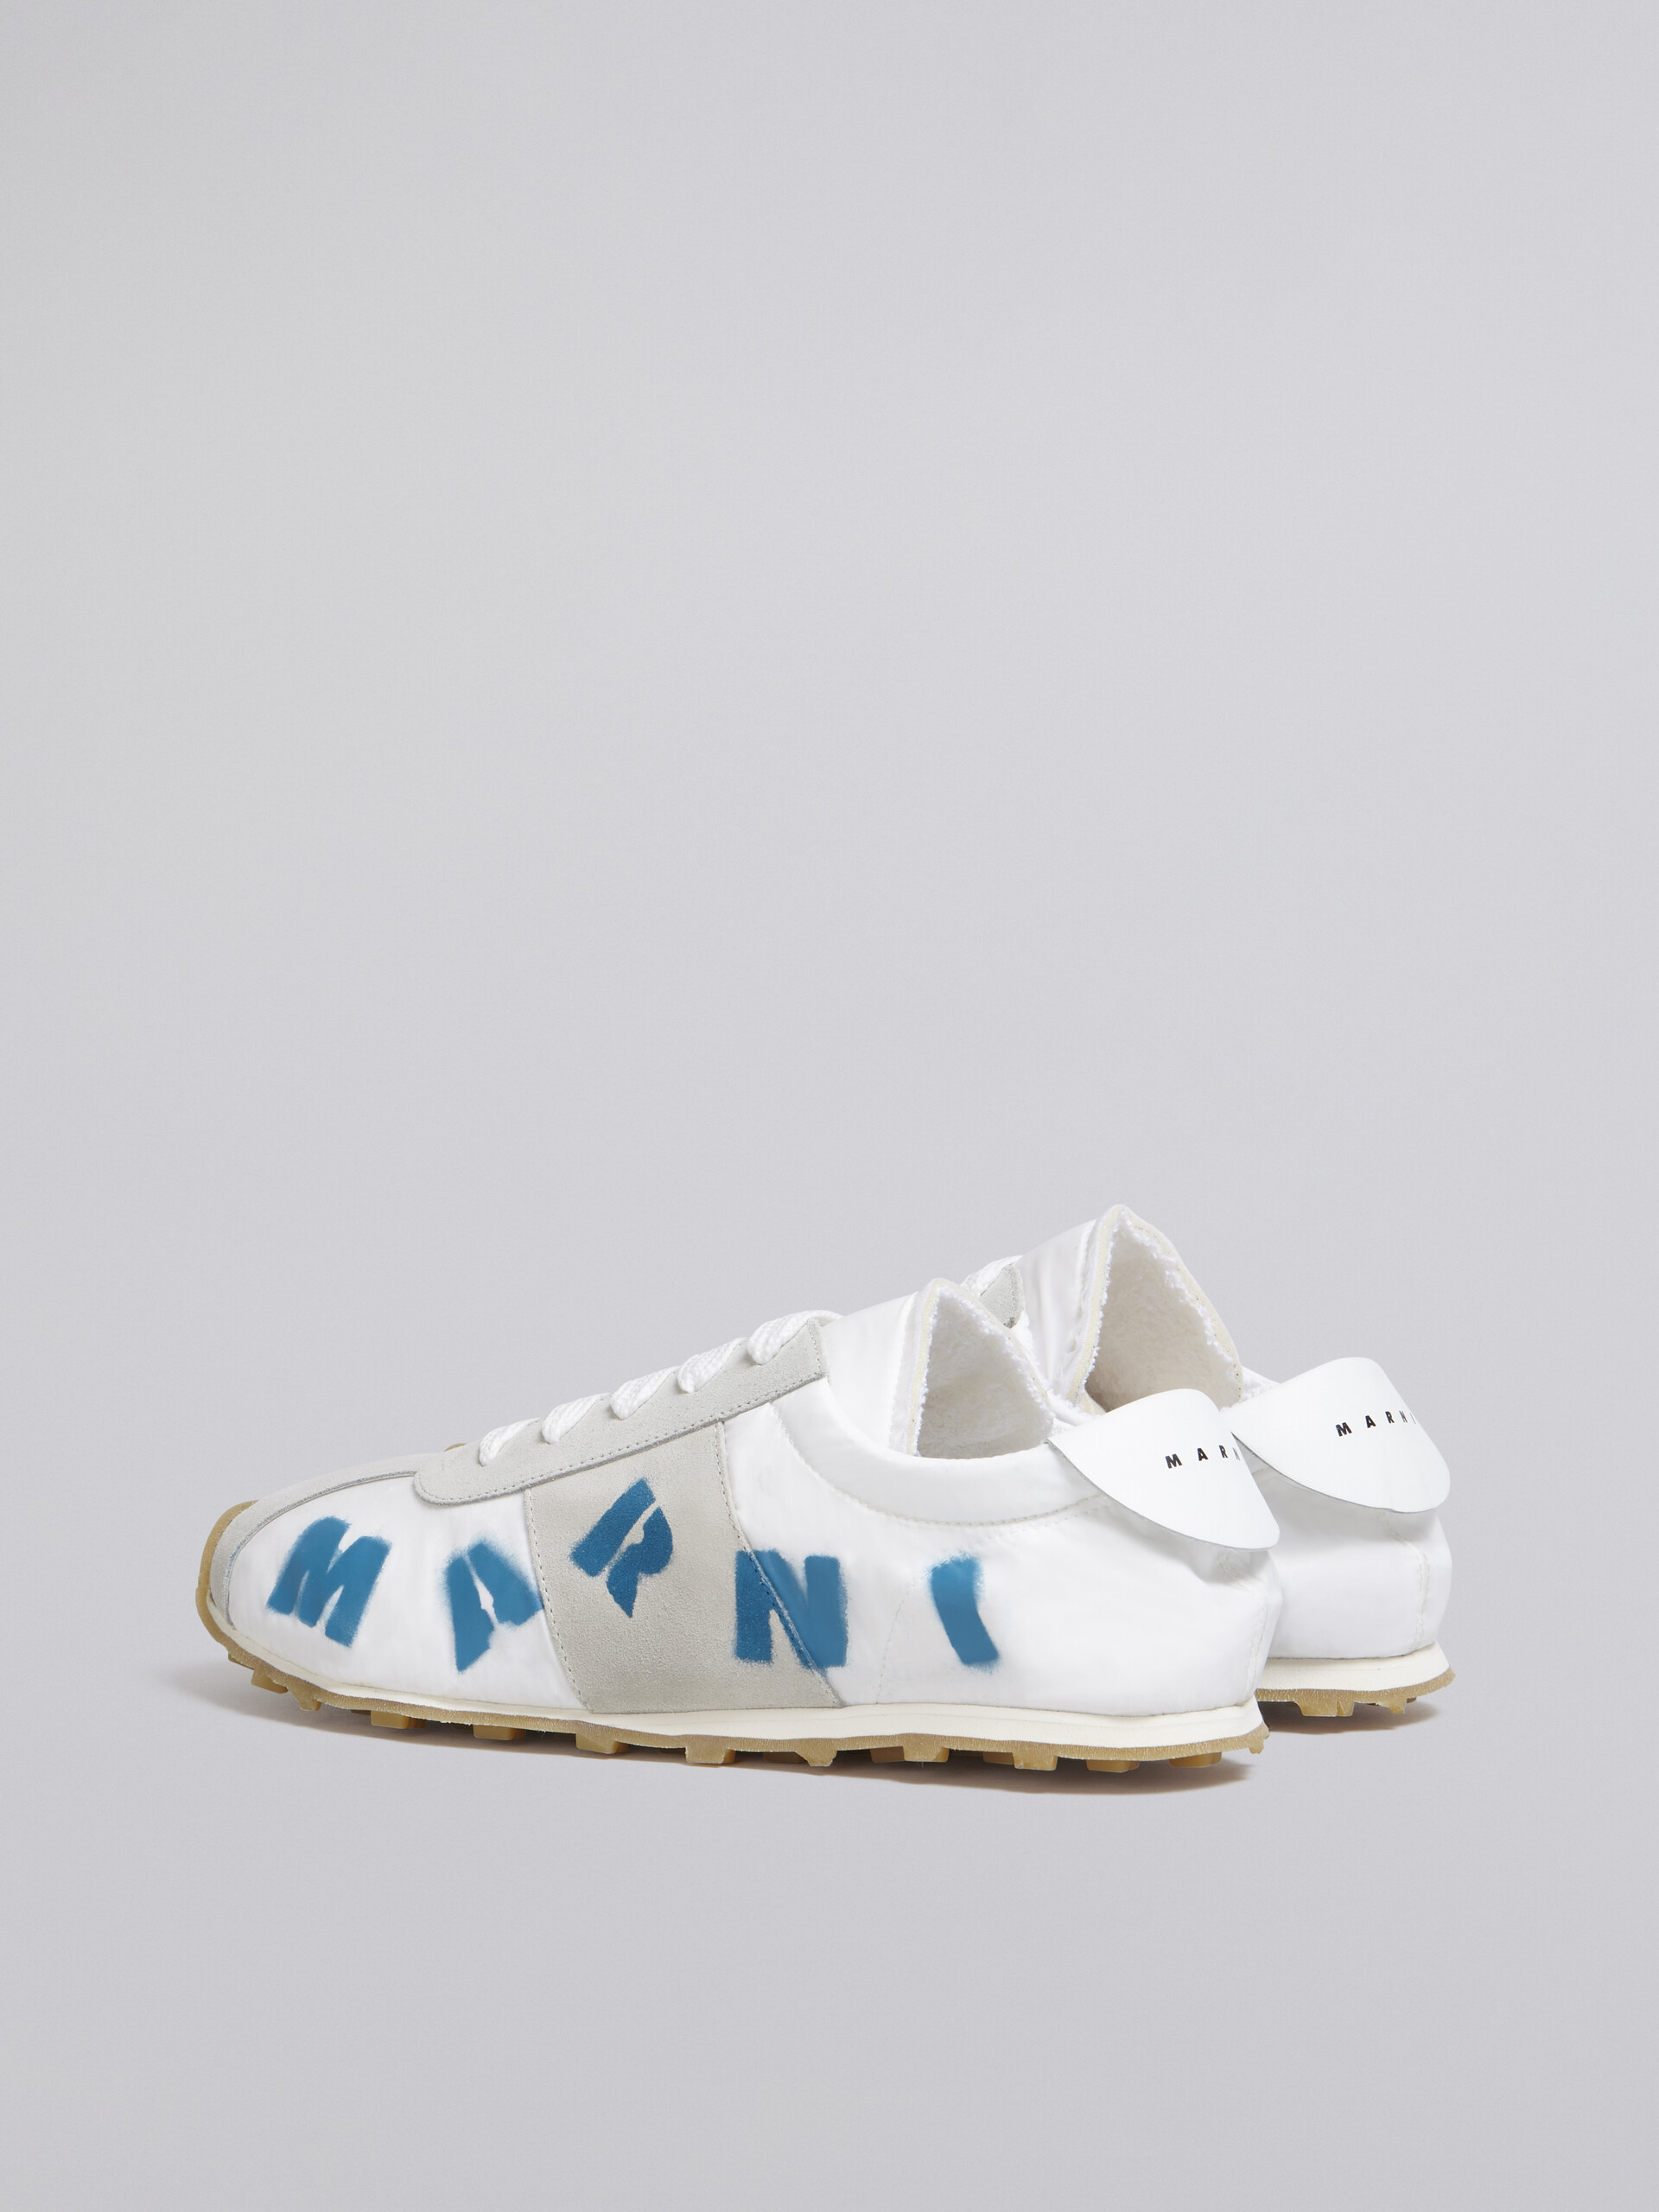 White polyamide sneaker with airbrushed Marni logo - Sneakers - Image 3